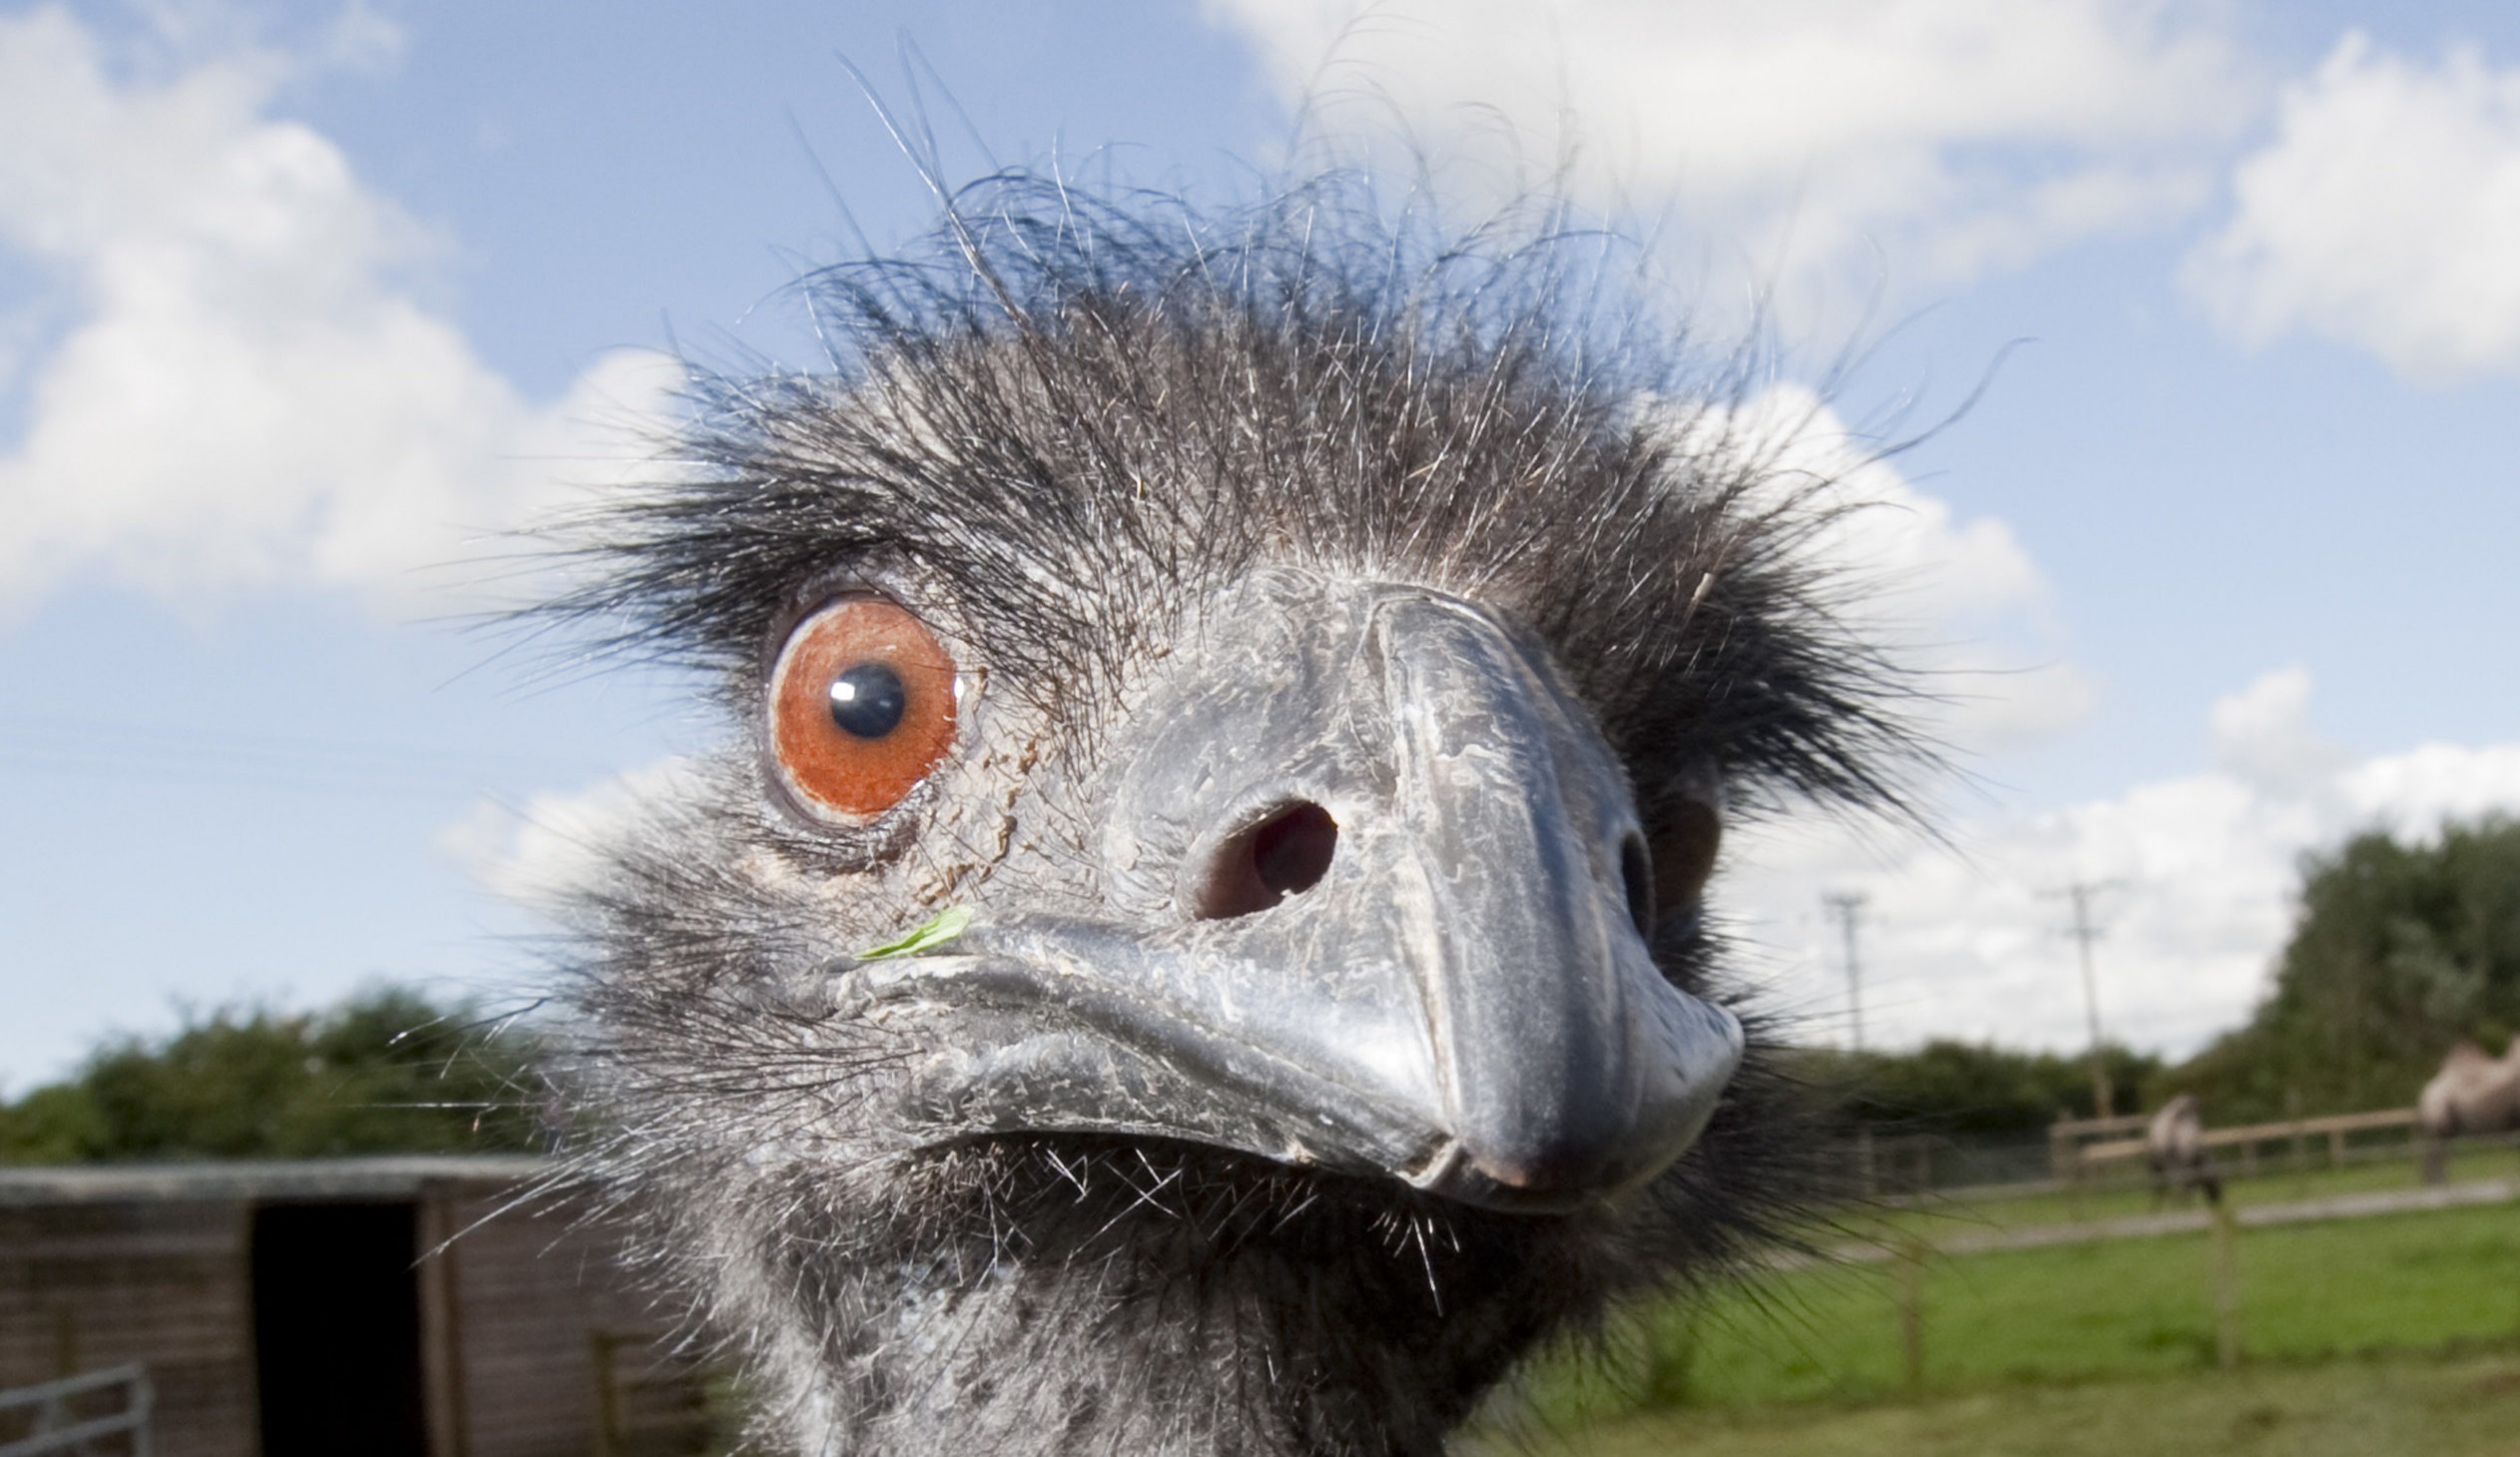 High Quality They do WHAT to Emus???? Blank Meme Template